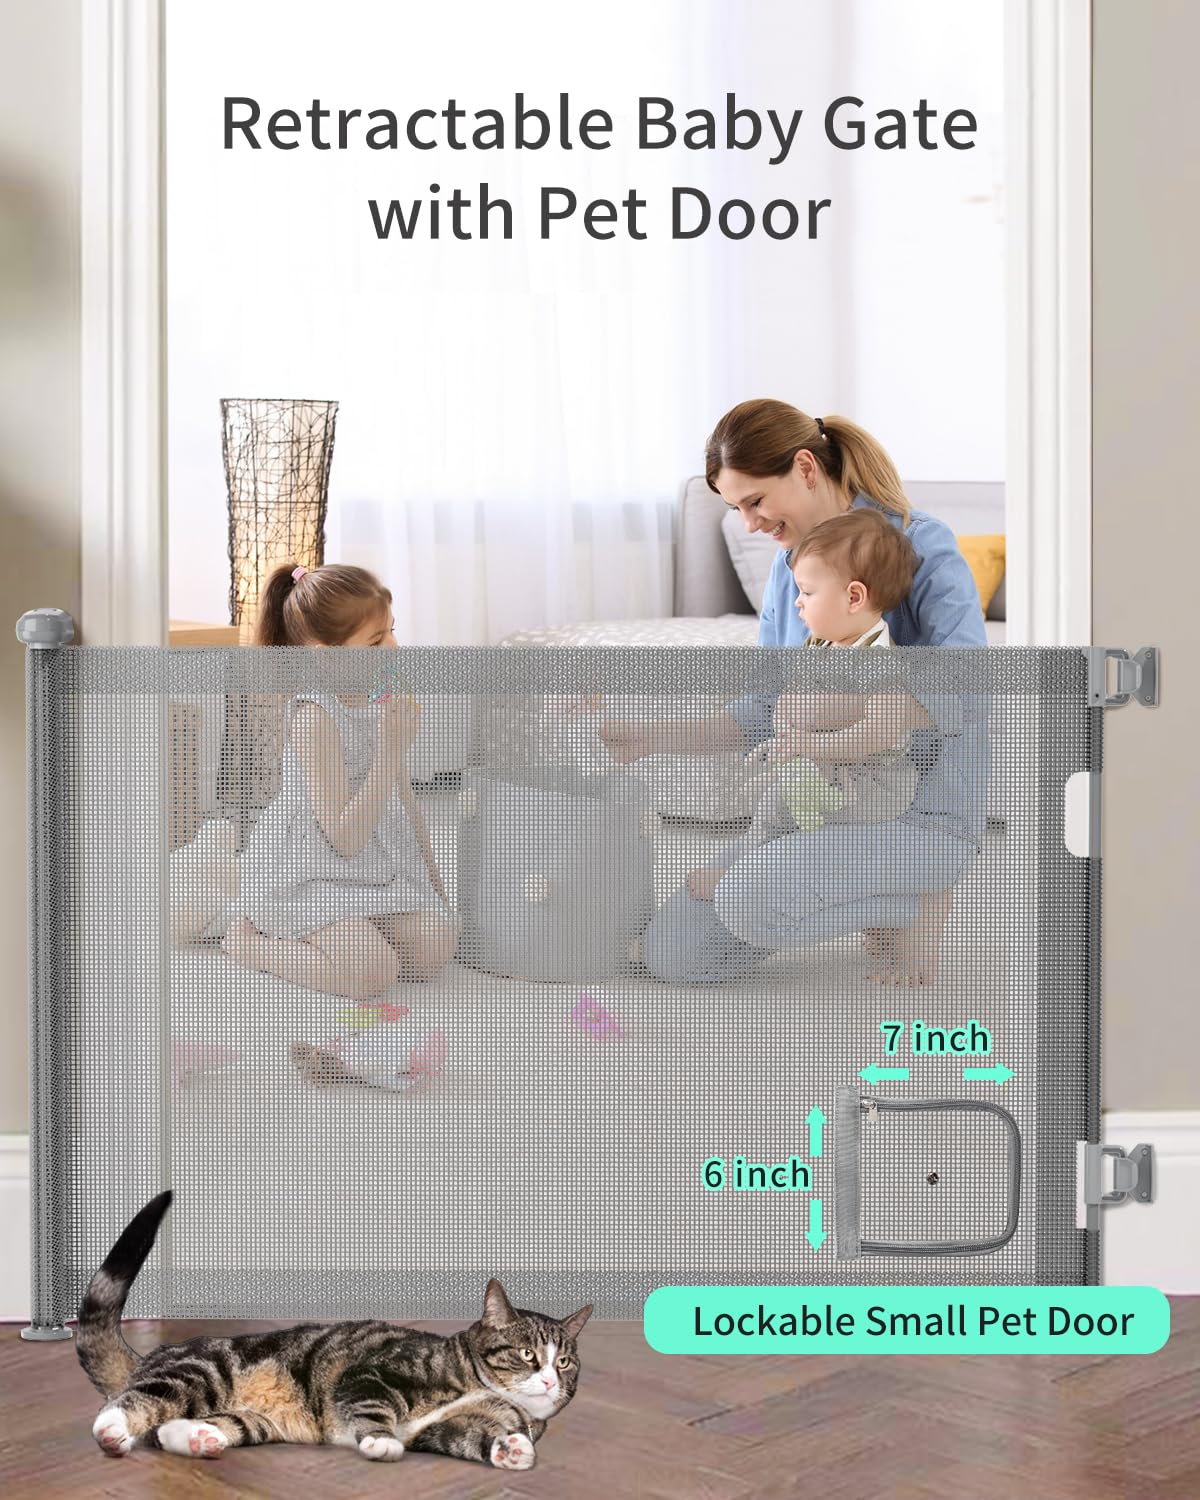 GROWNSY Retractable Baby Gates, Pet Gate with Cat Door - 33" Tall, Extends to 55" Wide Dog Gate for Stairs, Mesh Baby Gate with Door for Cats/Small Dogs, Easy Install for Doorways, Indoor &Outdoor